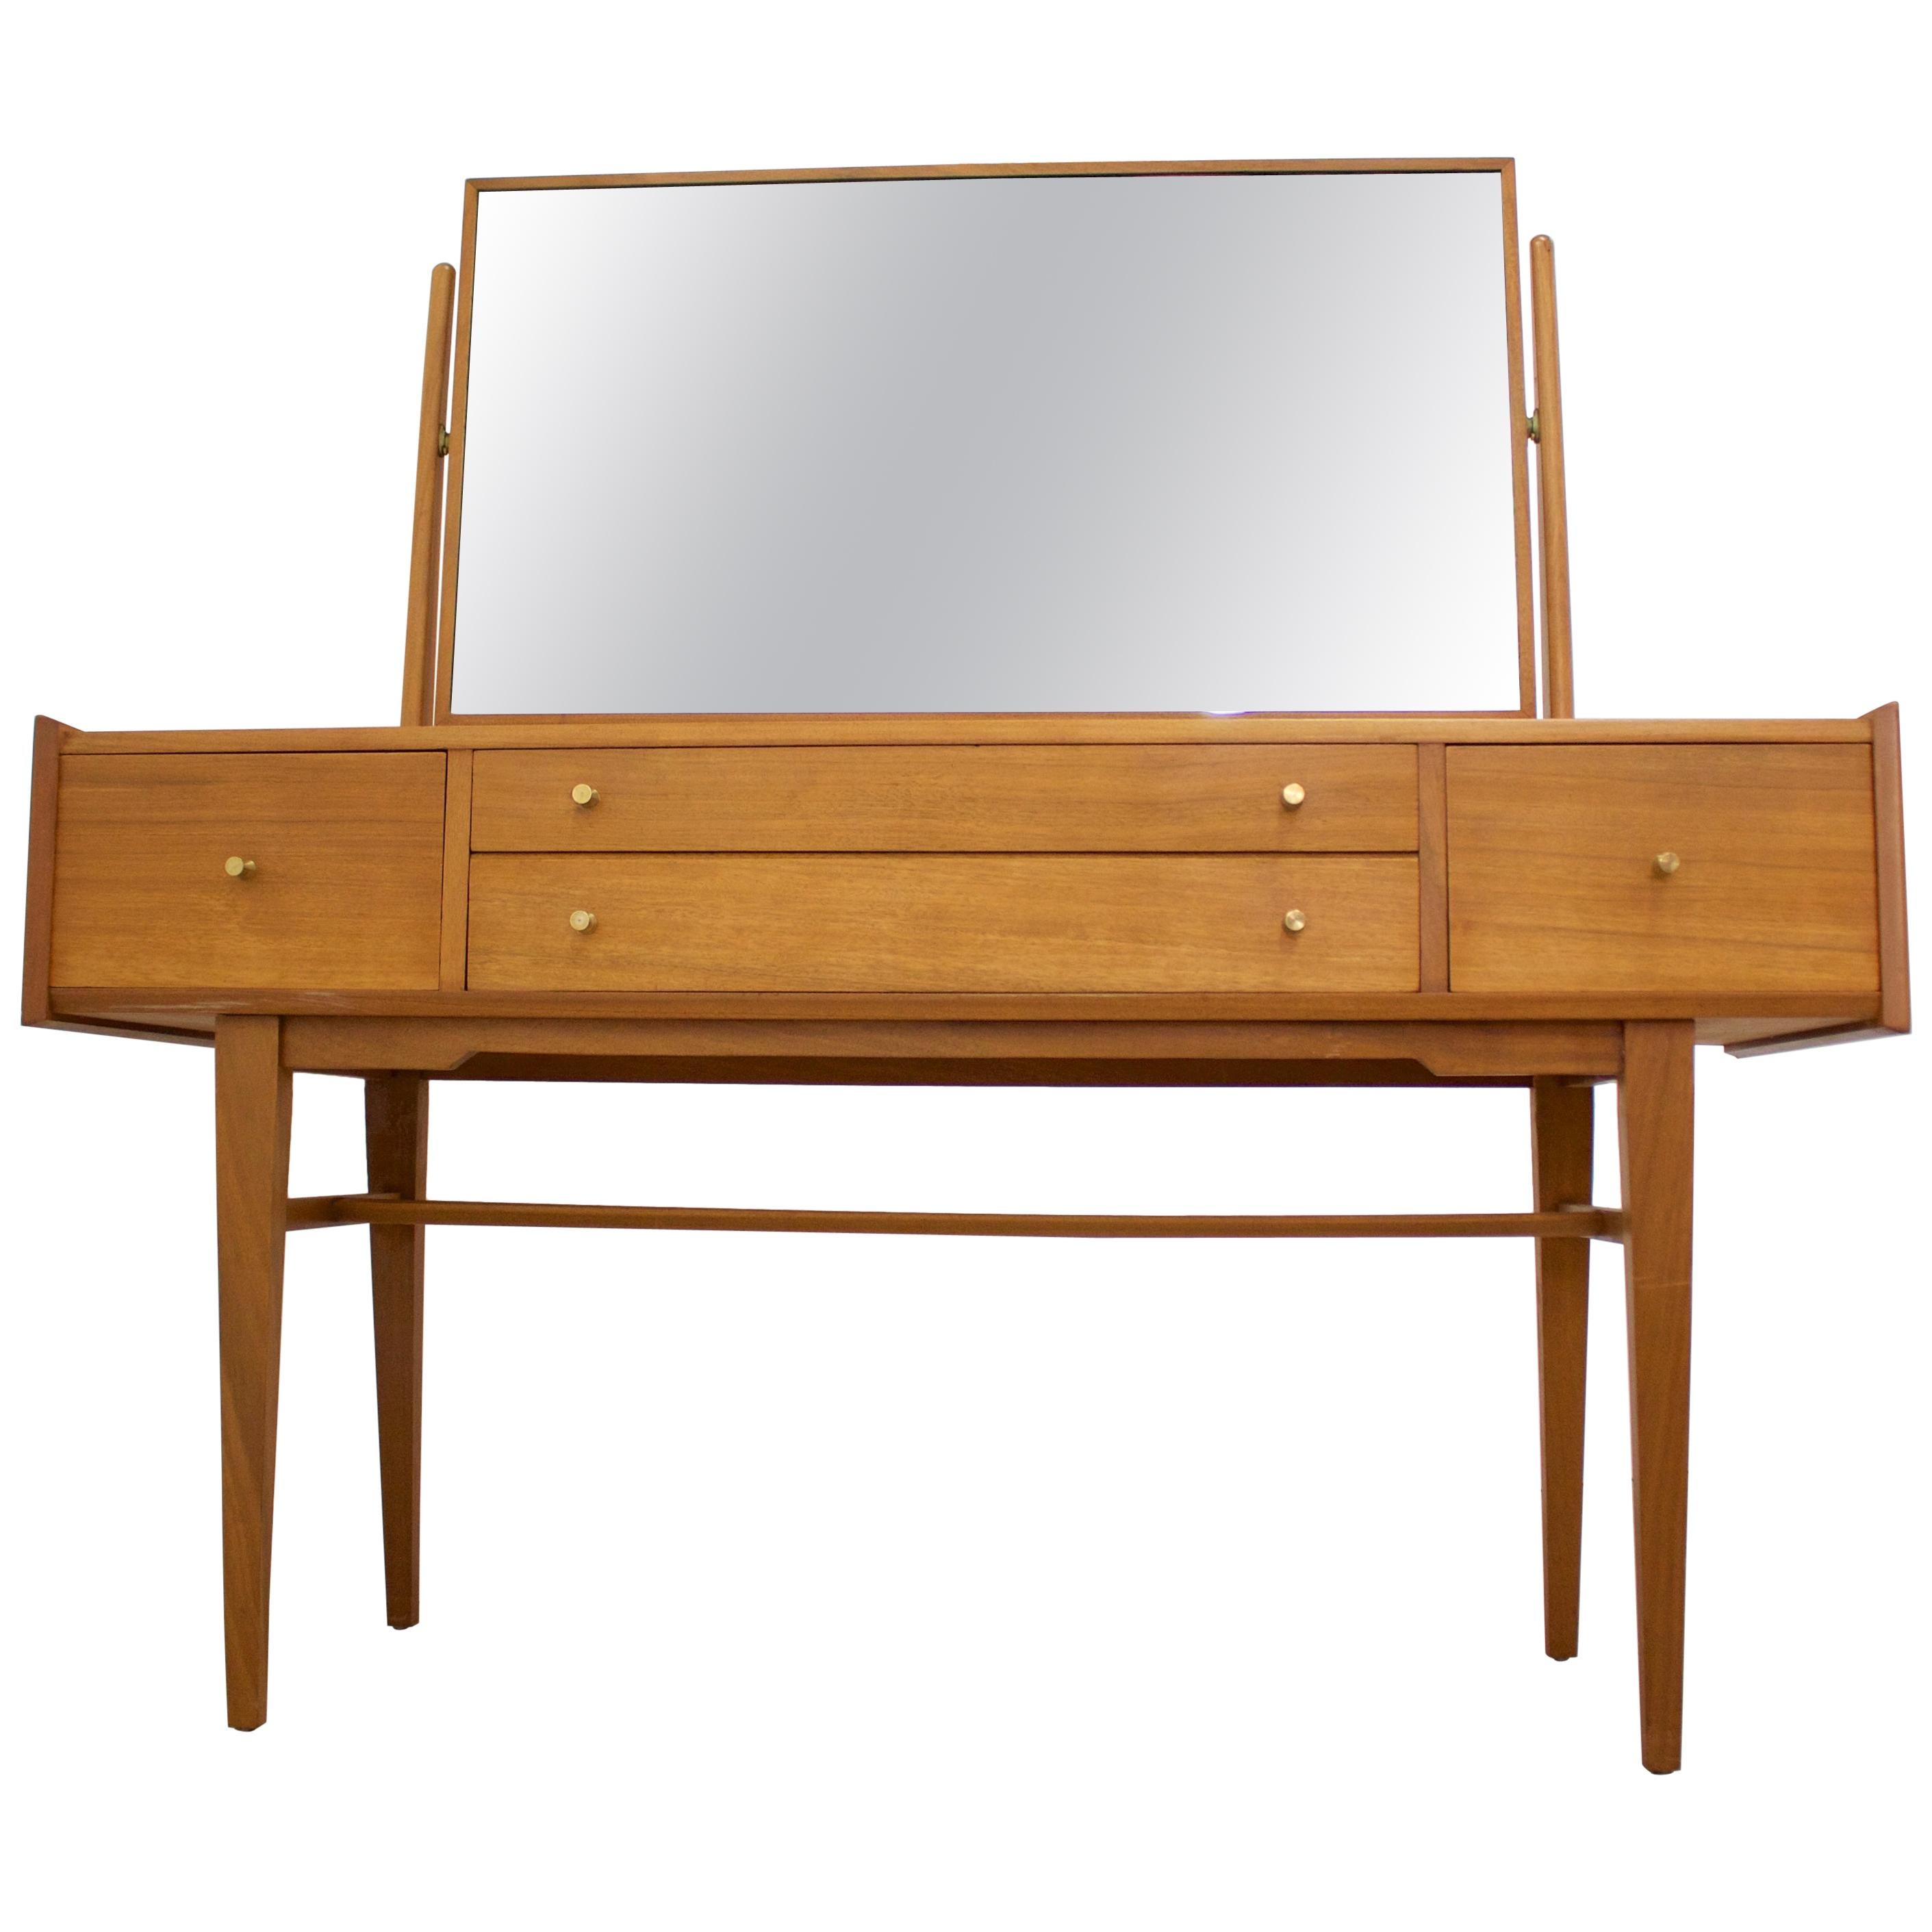 Midcentury Walnut Dressing Table from a. Younger Ltd., 1960s